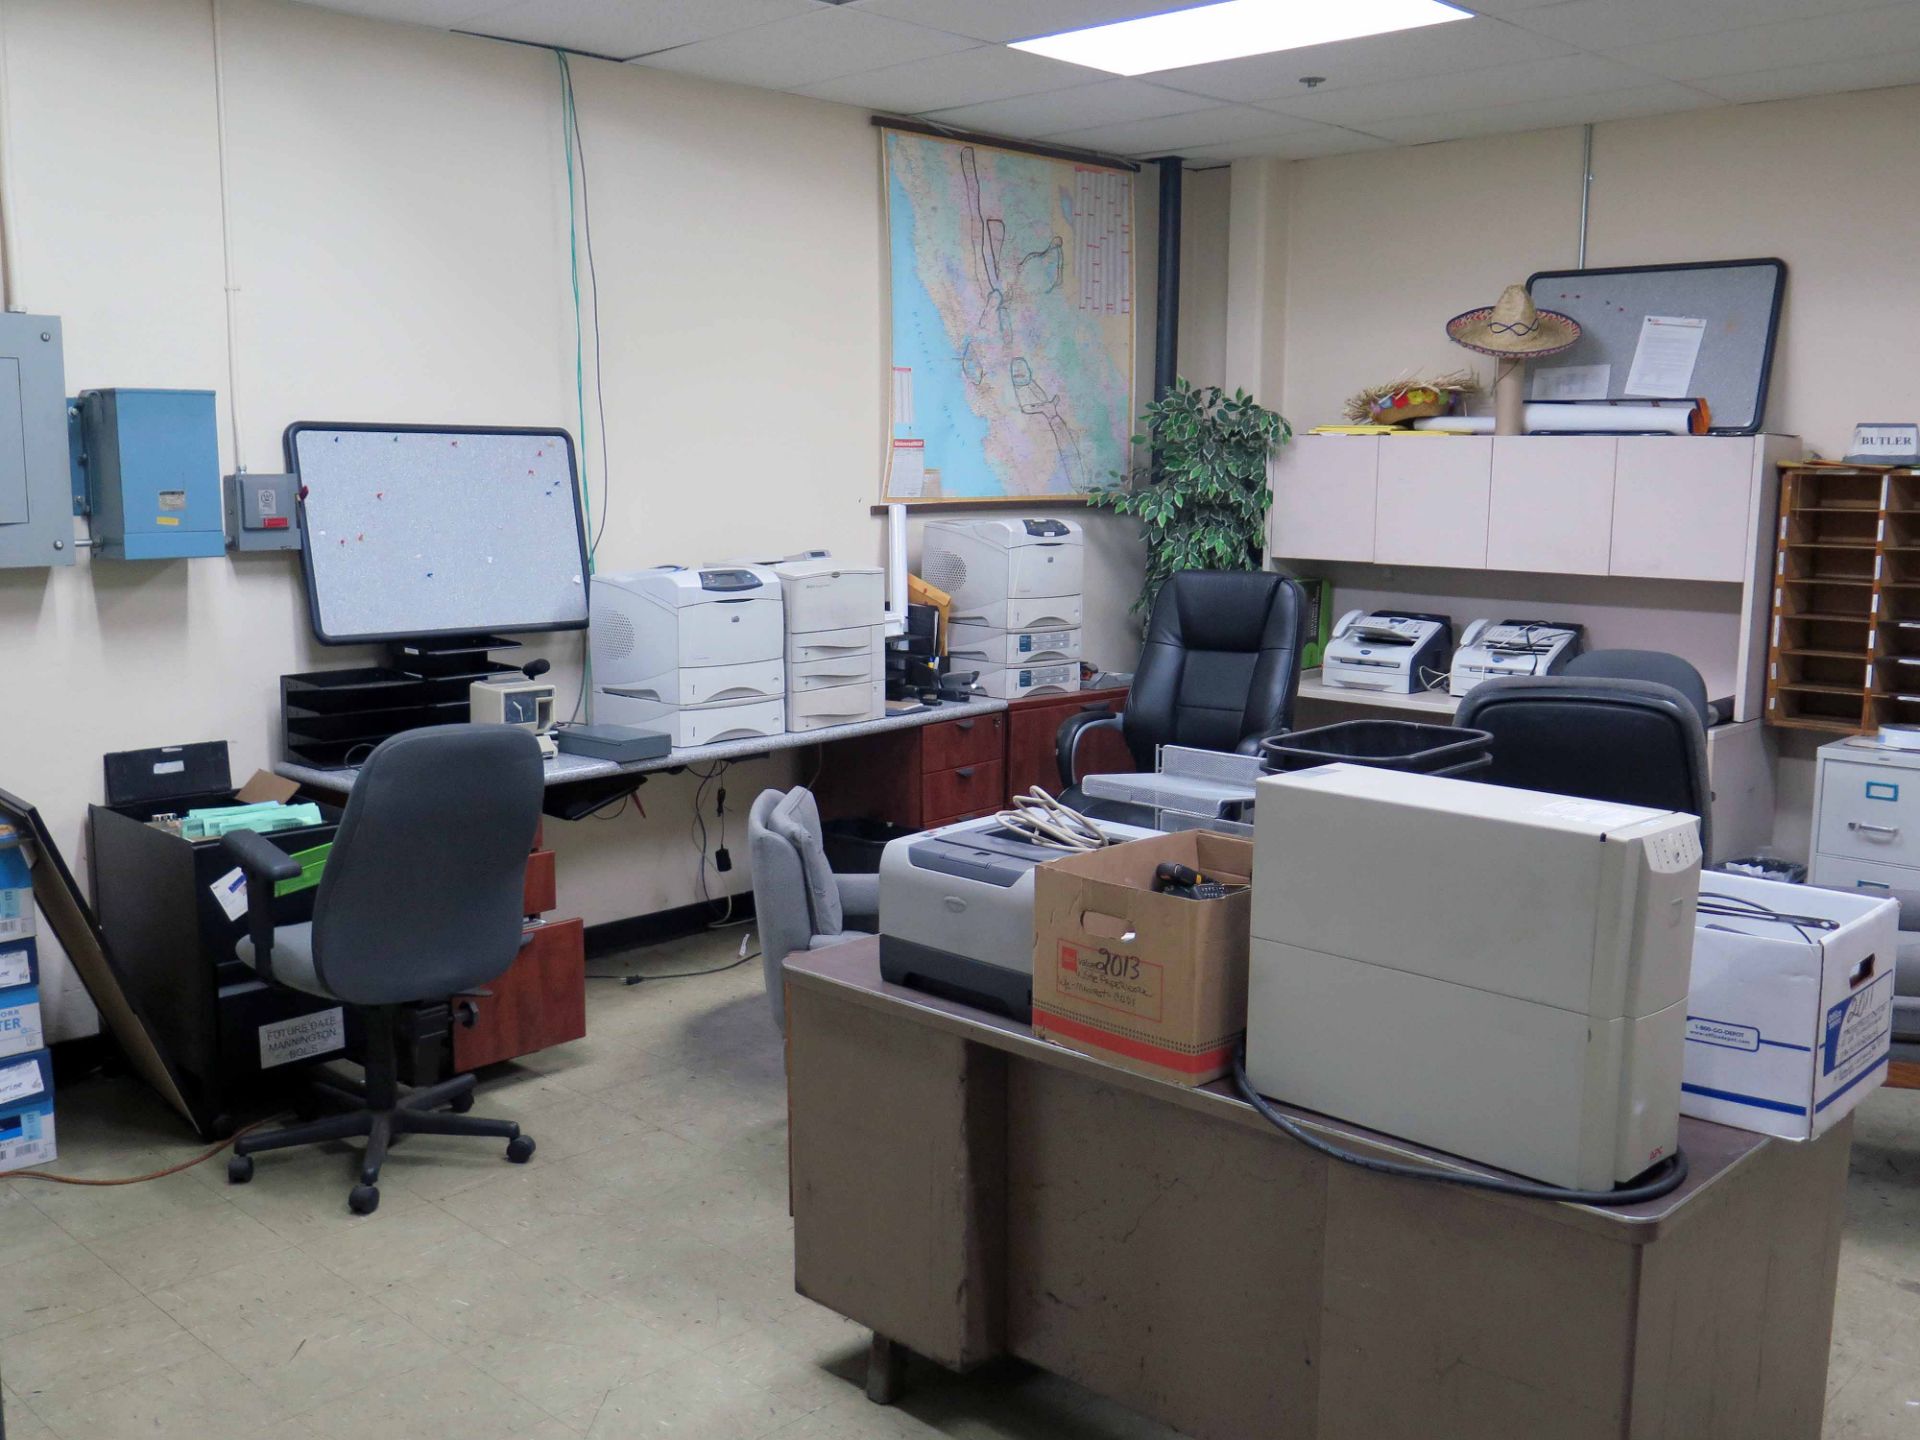 DISPATCH OFFICE, w/printers, filing cabinets, office furniture, metro rack